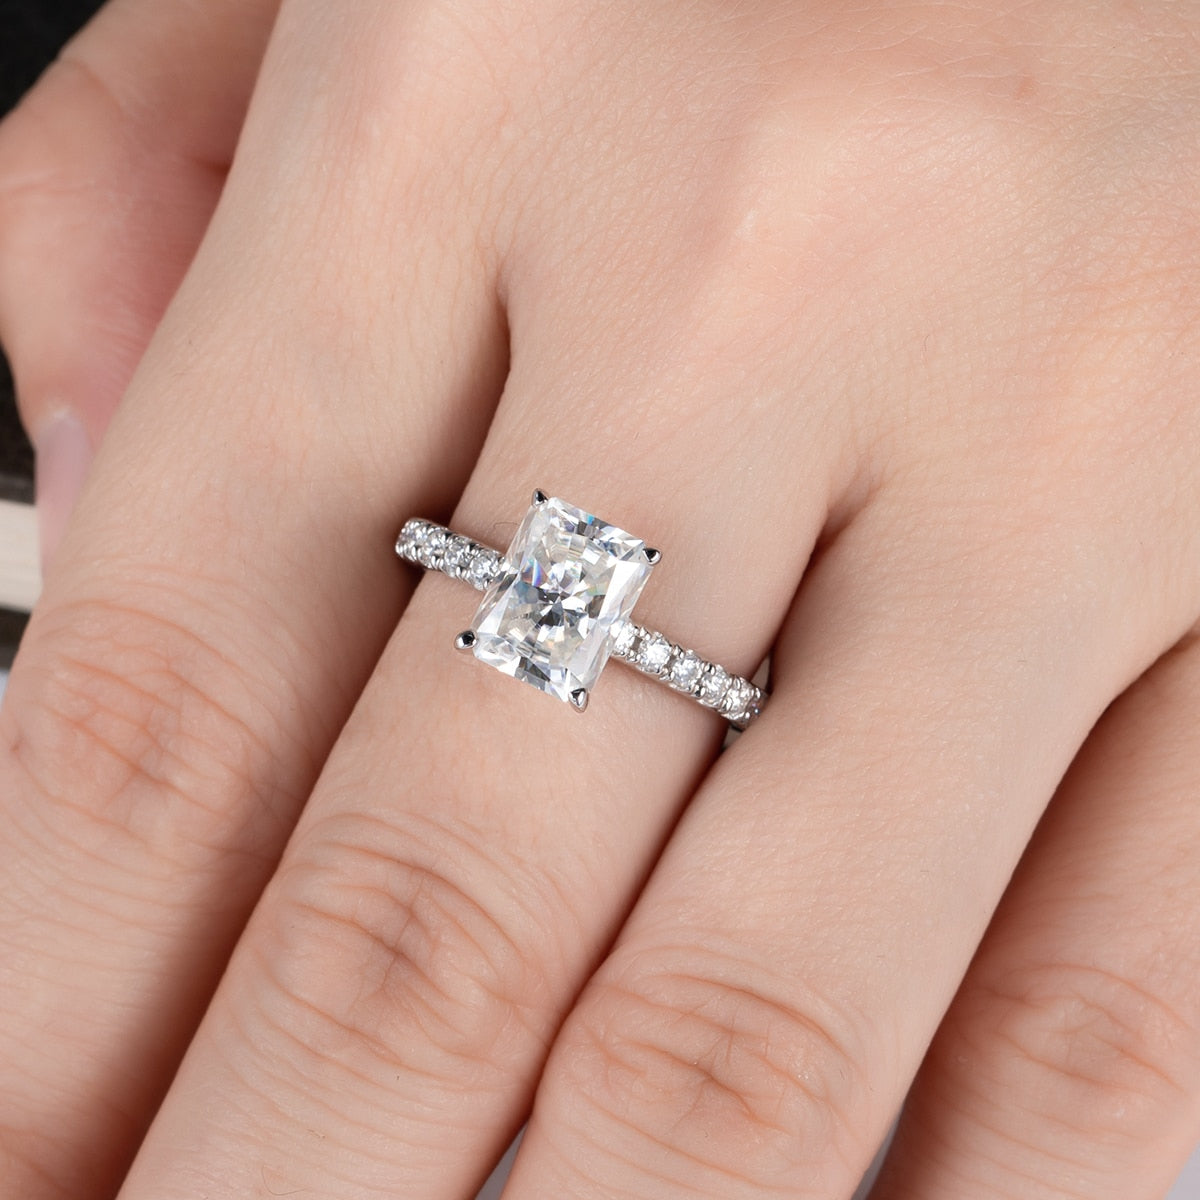 A hand wearing a moissanite ring with a 3CT radiant cut gem set on a moissanite pave band.